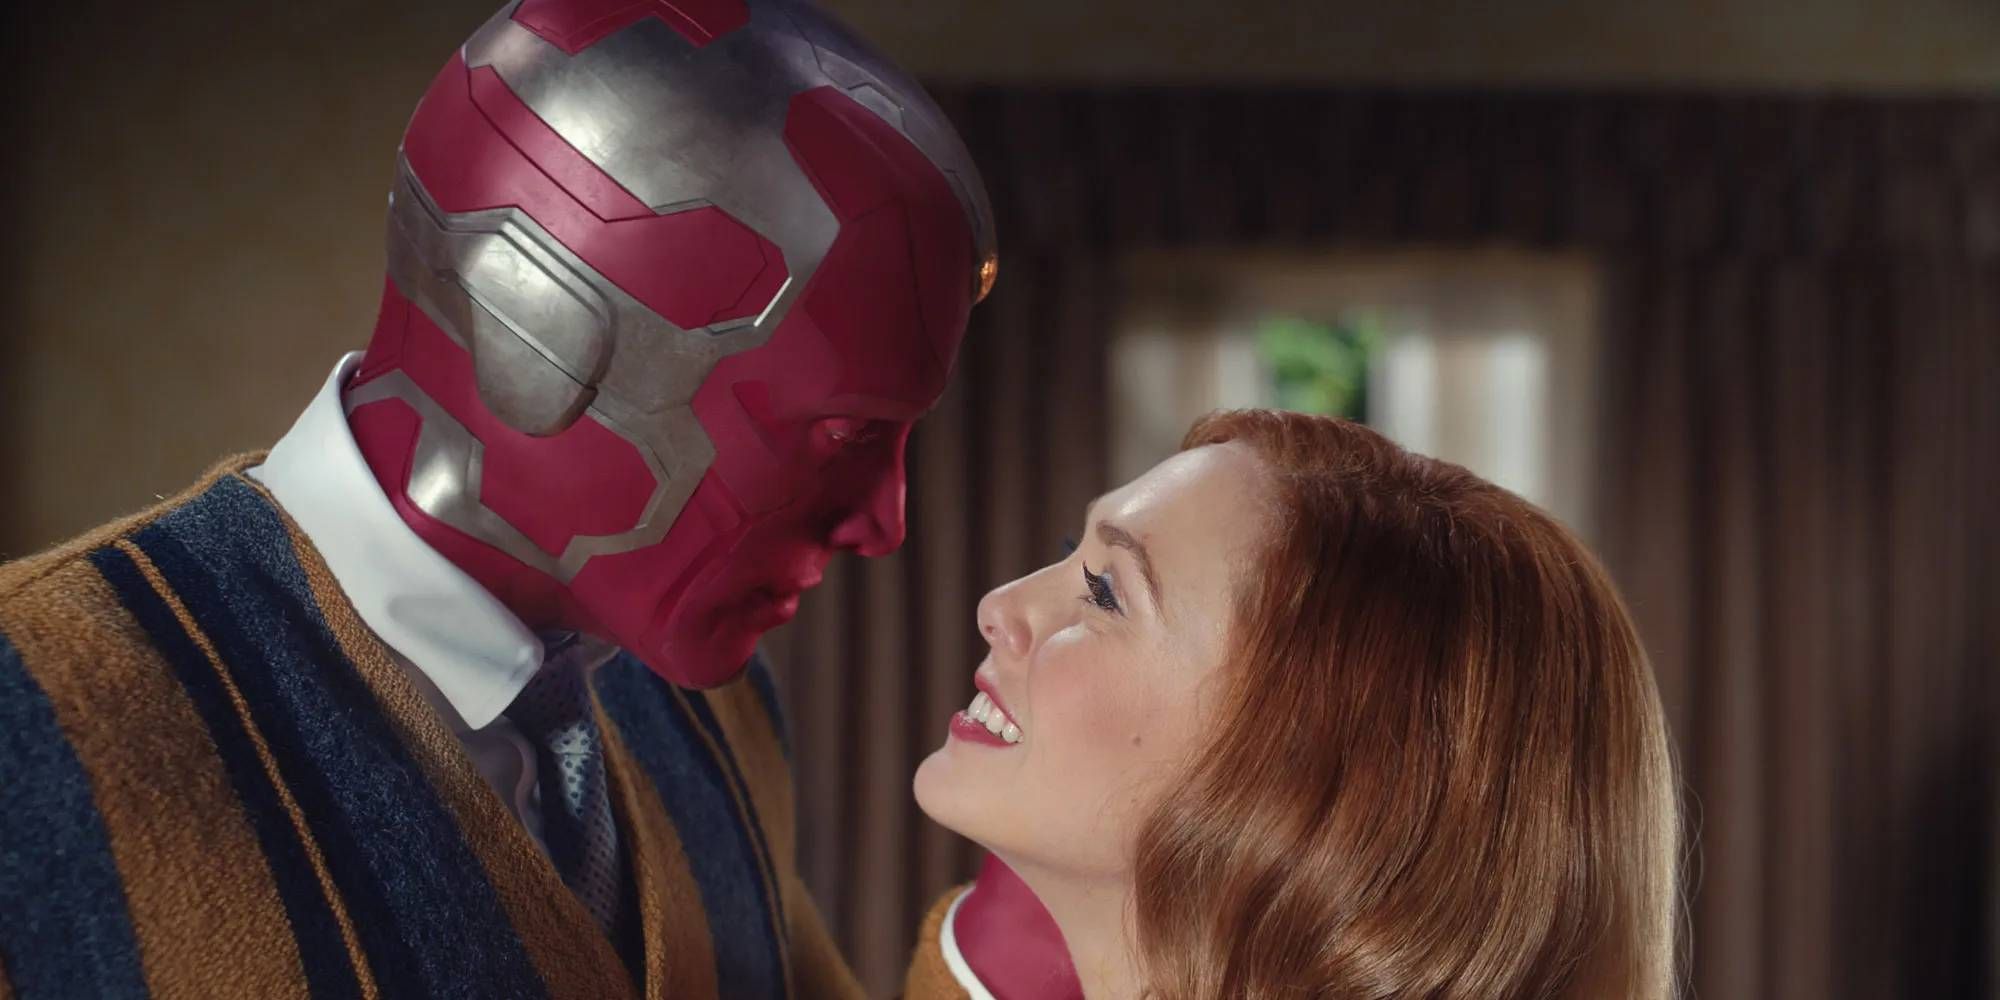 Paul Bettany as Vision looking at Elizabeth Olsen as Wanda, who is smiling, in Wandavision.